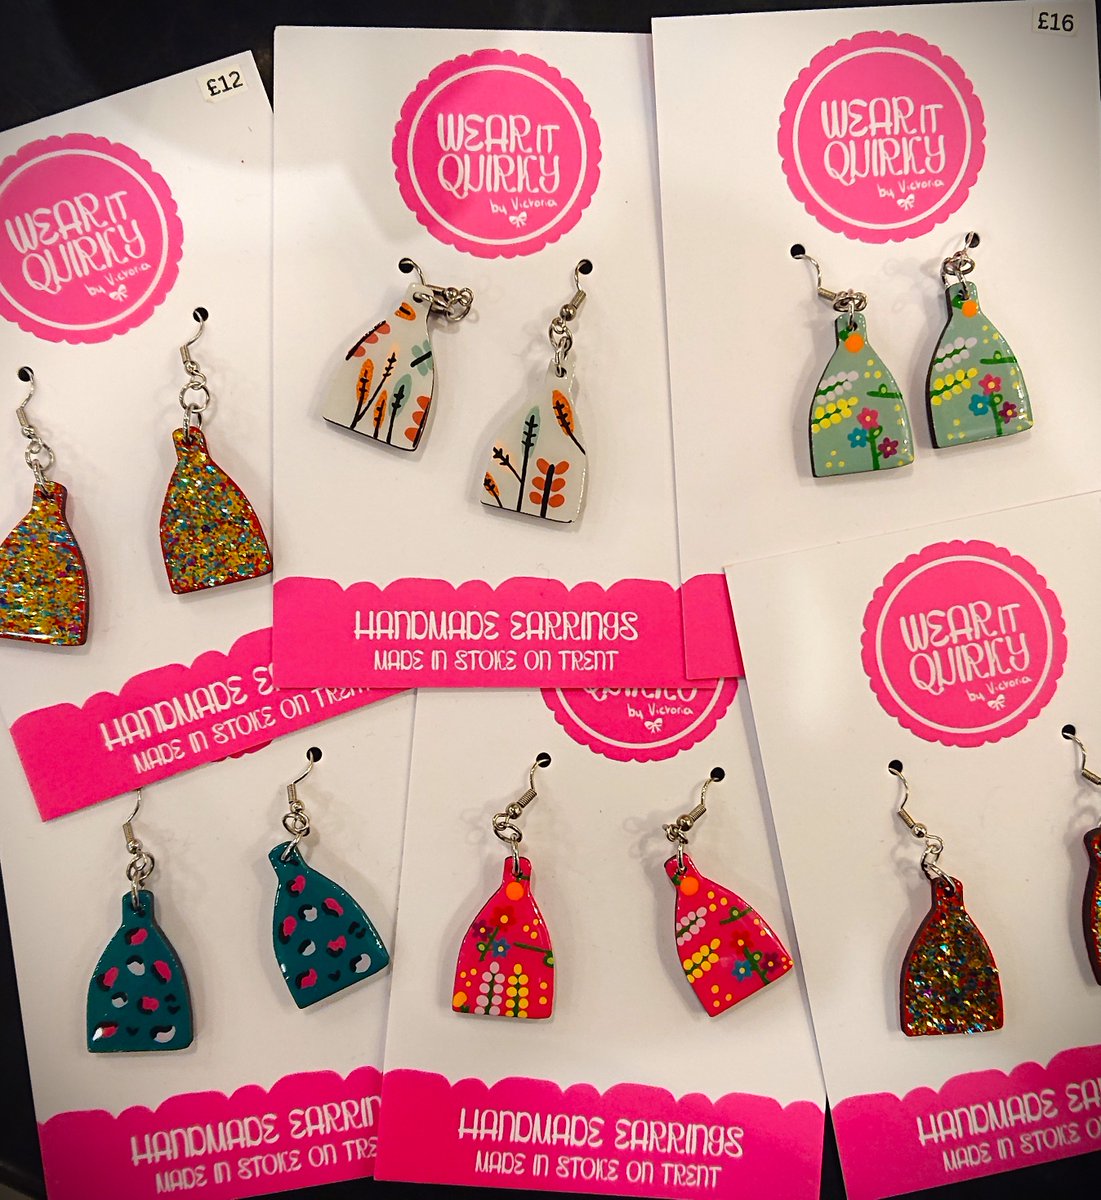 More new shop stock! These beautiful #bottleoven earring are #handmade locally by Wear it Quirky. Sparkly kilns - £12 a pair, floral patterns - £16.
We're open 10am - 5pm Tues to Sat & 1.30 - 5pm on Sundays, pop in to browse lovely things made by local artists.
#staffordshire